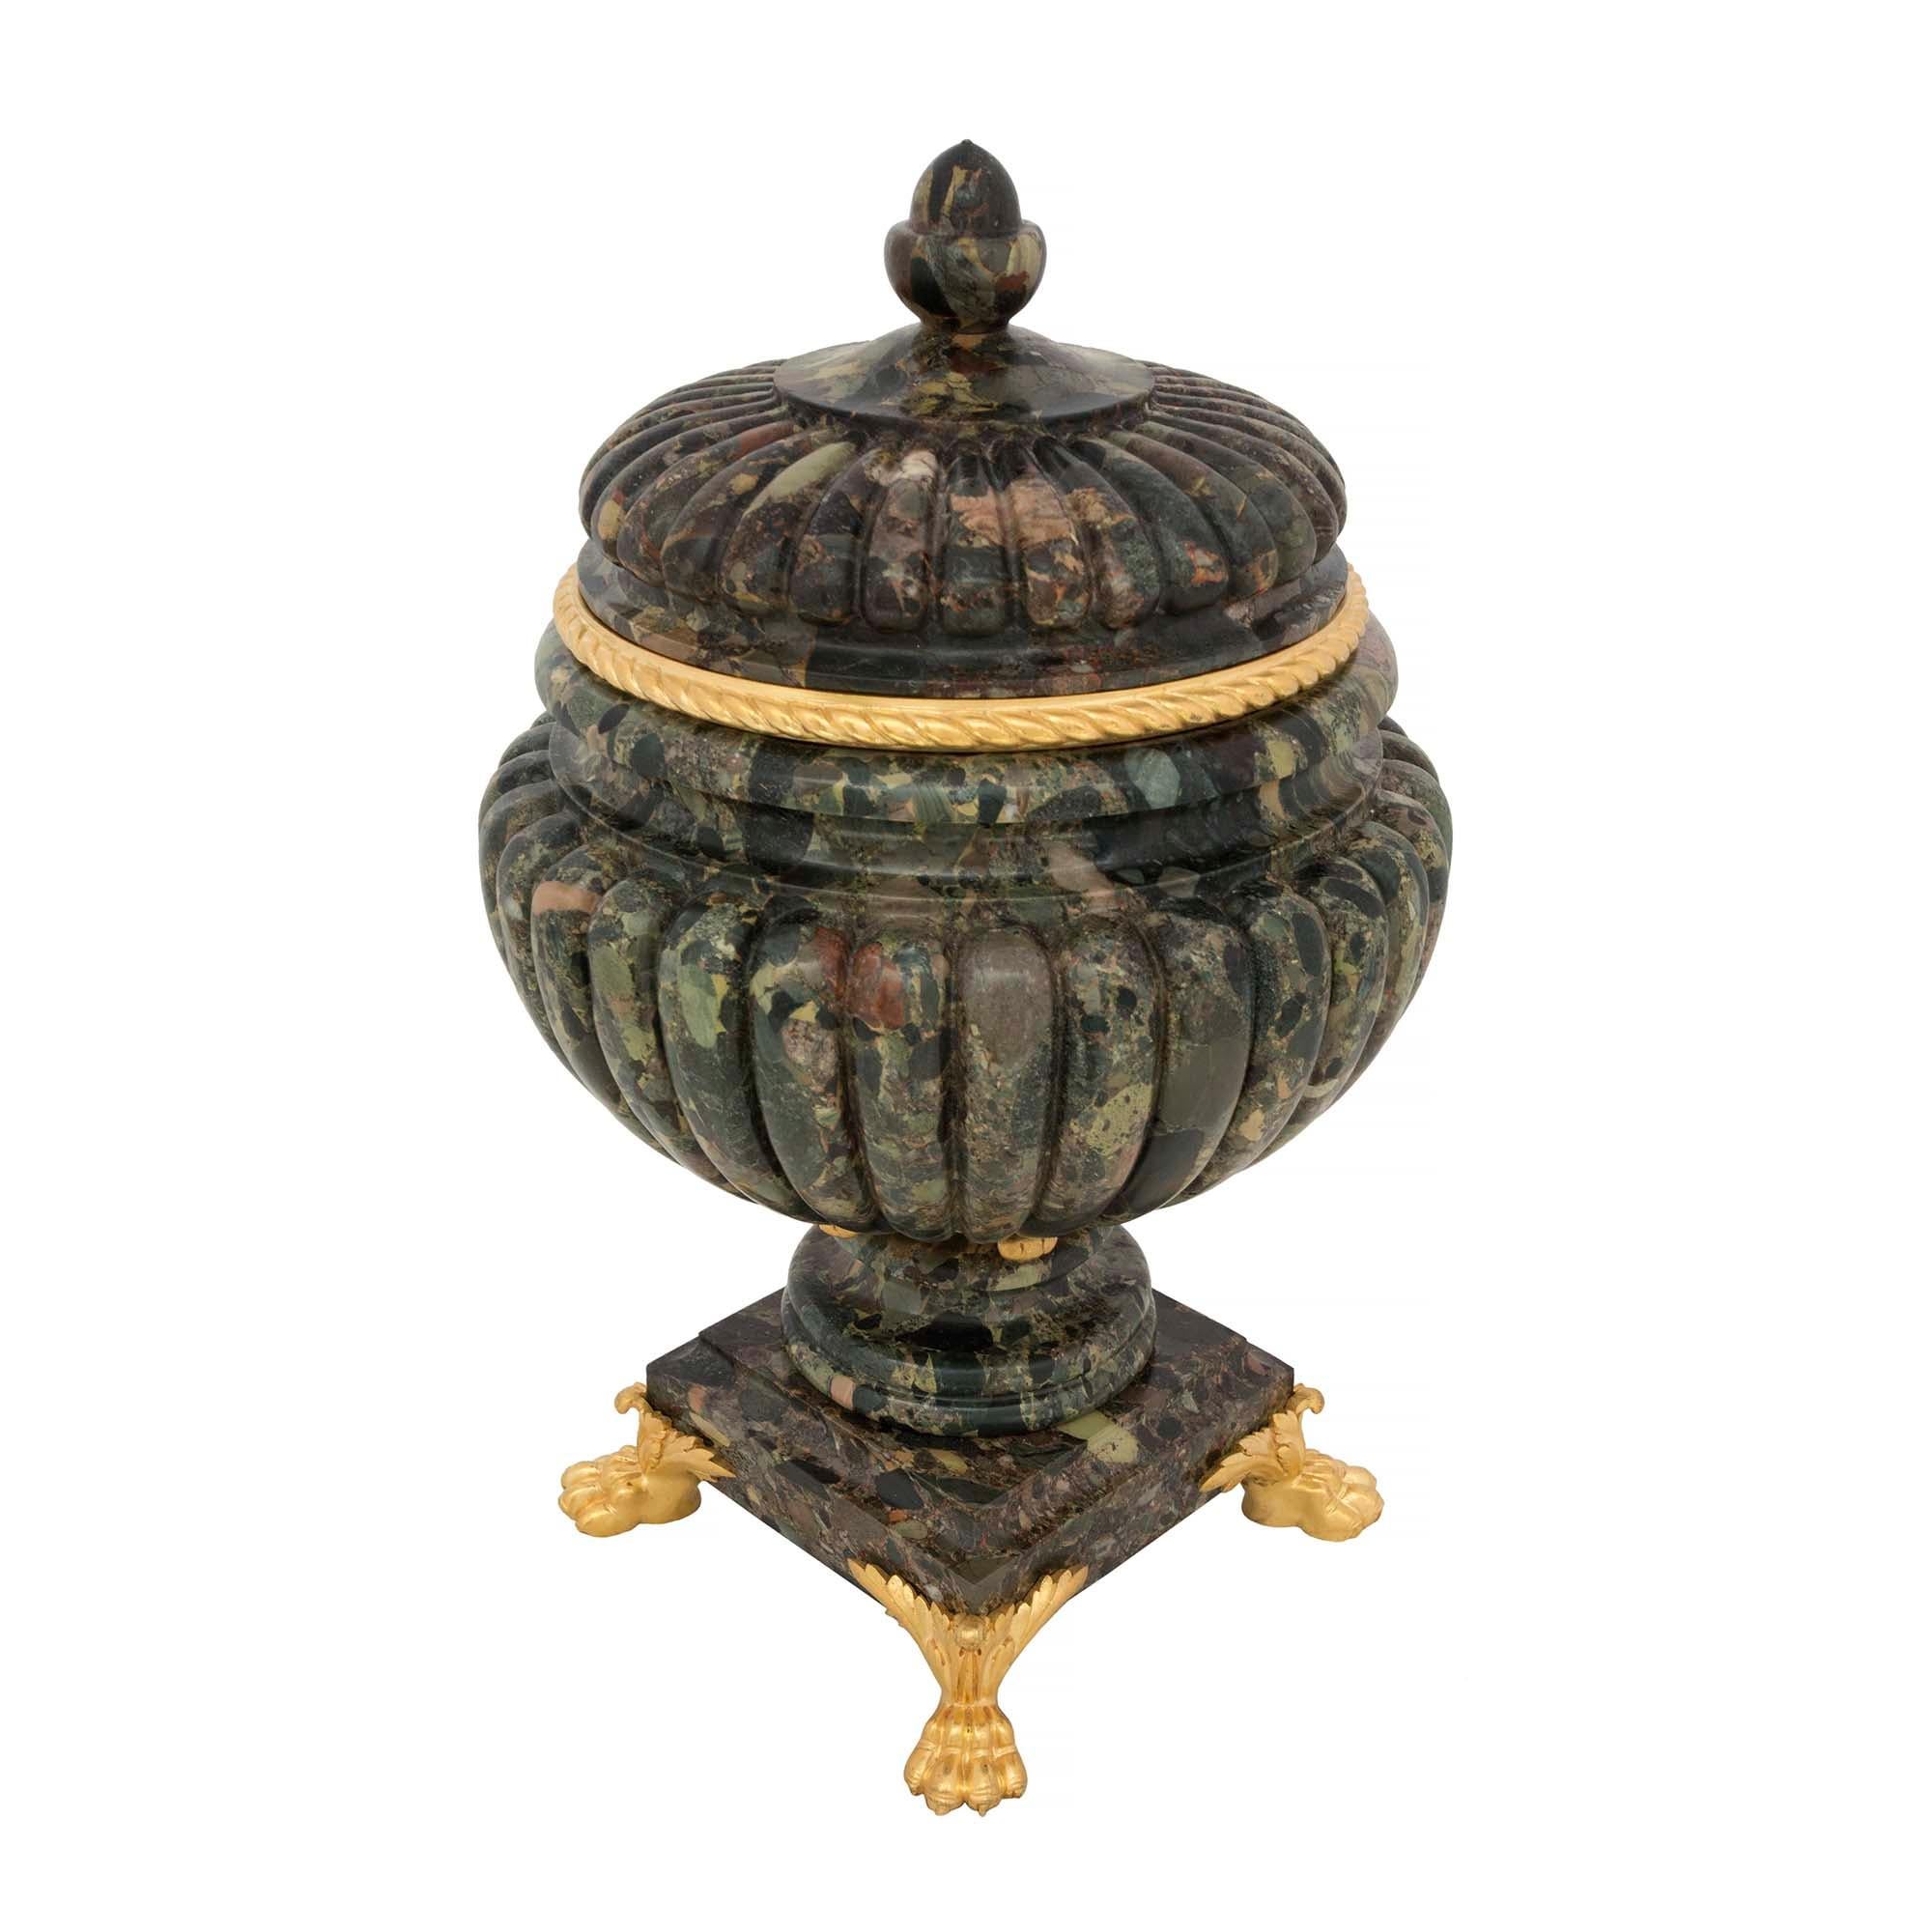 An exceptional pair of French 19th century neo-classical st. Brèche Verte d'Egypte marble and ormolu lidded urns. Each urn is raised by richly chased ormolu paw feet with acanthus leaf detail. Above the square mottled base and circular socle